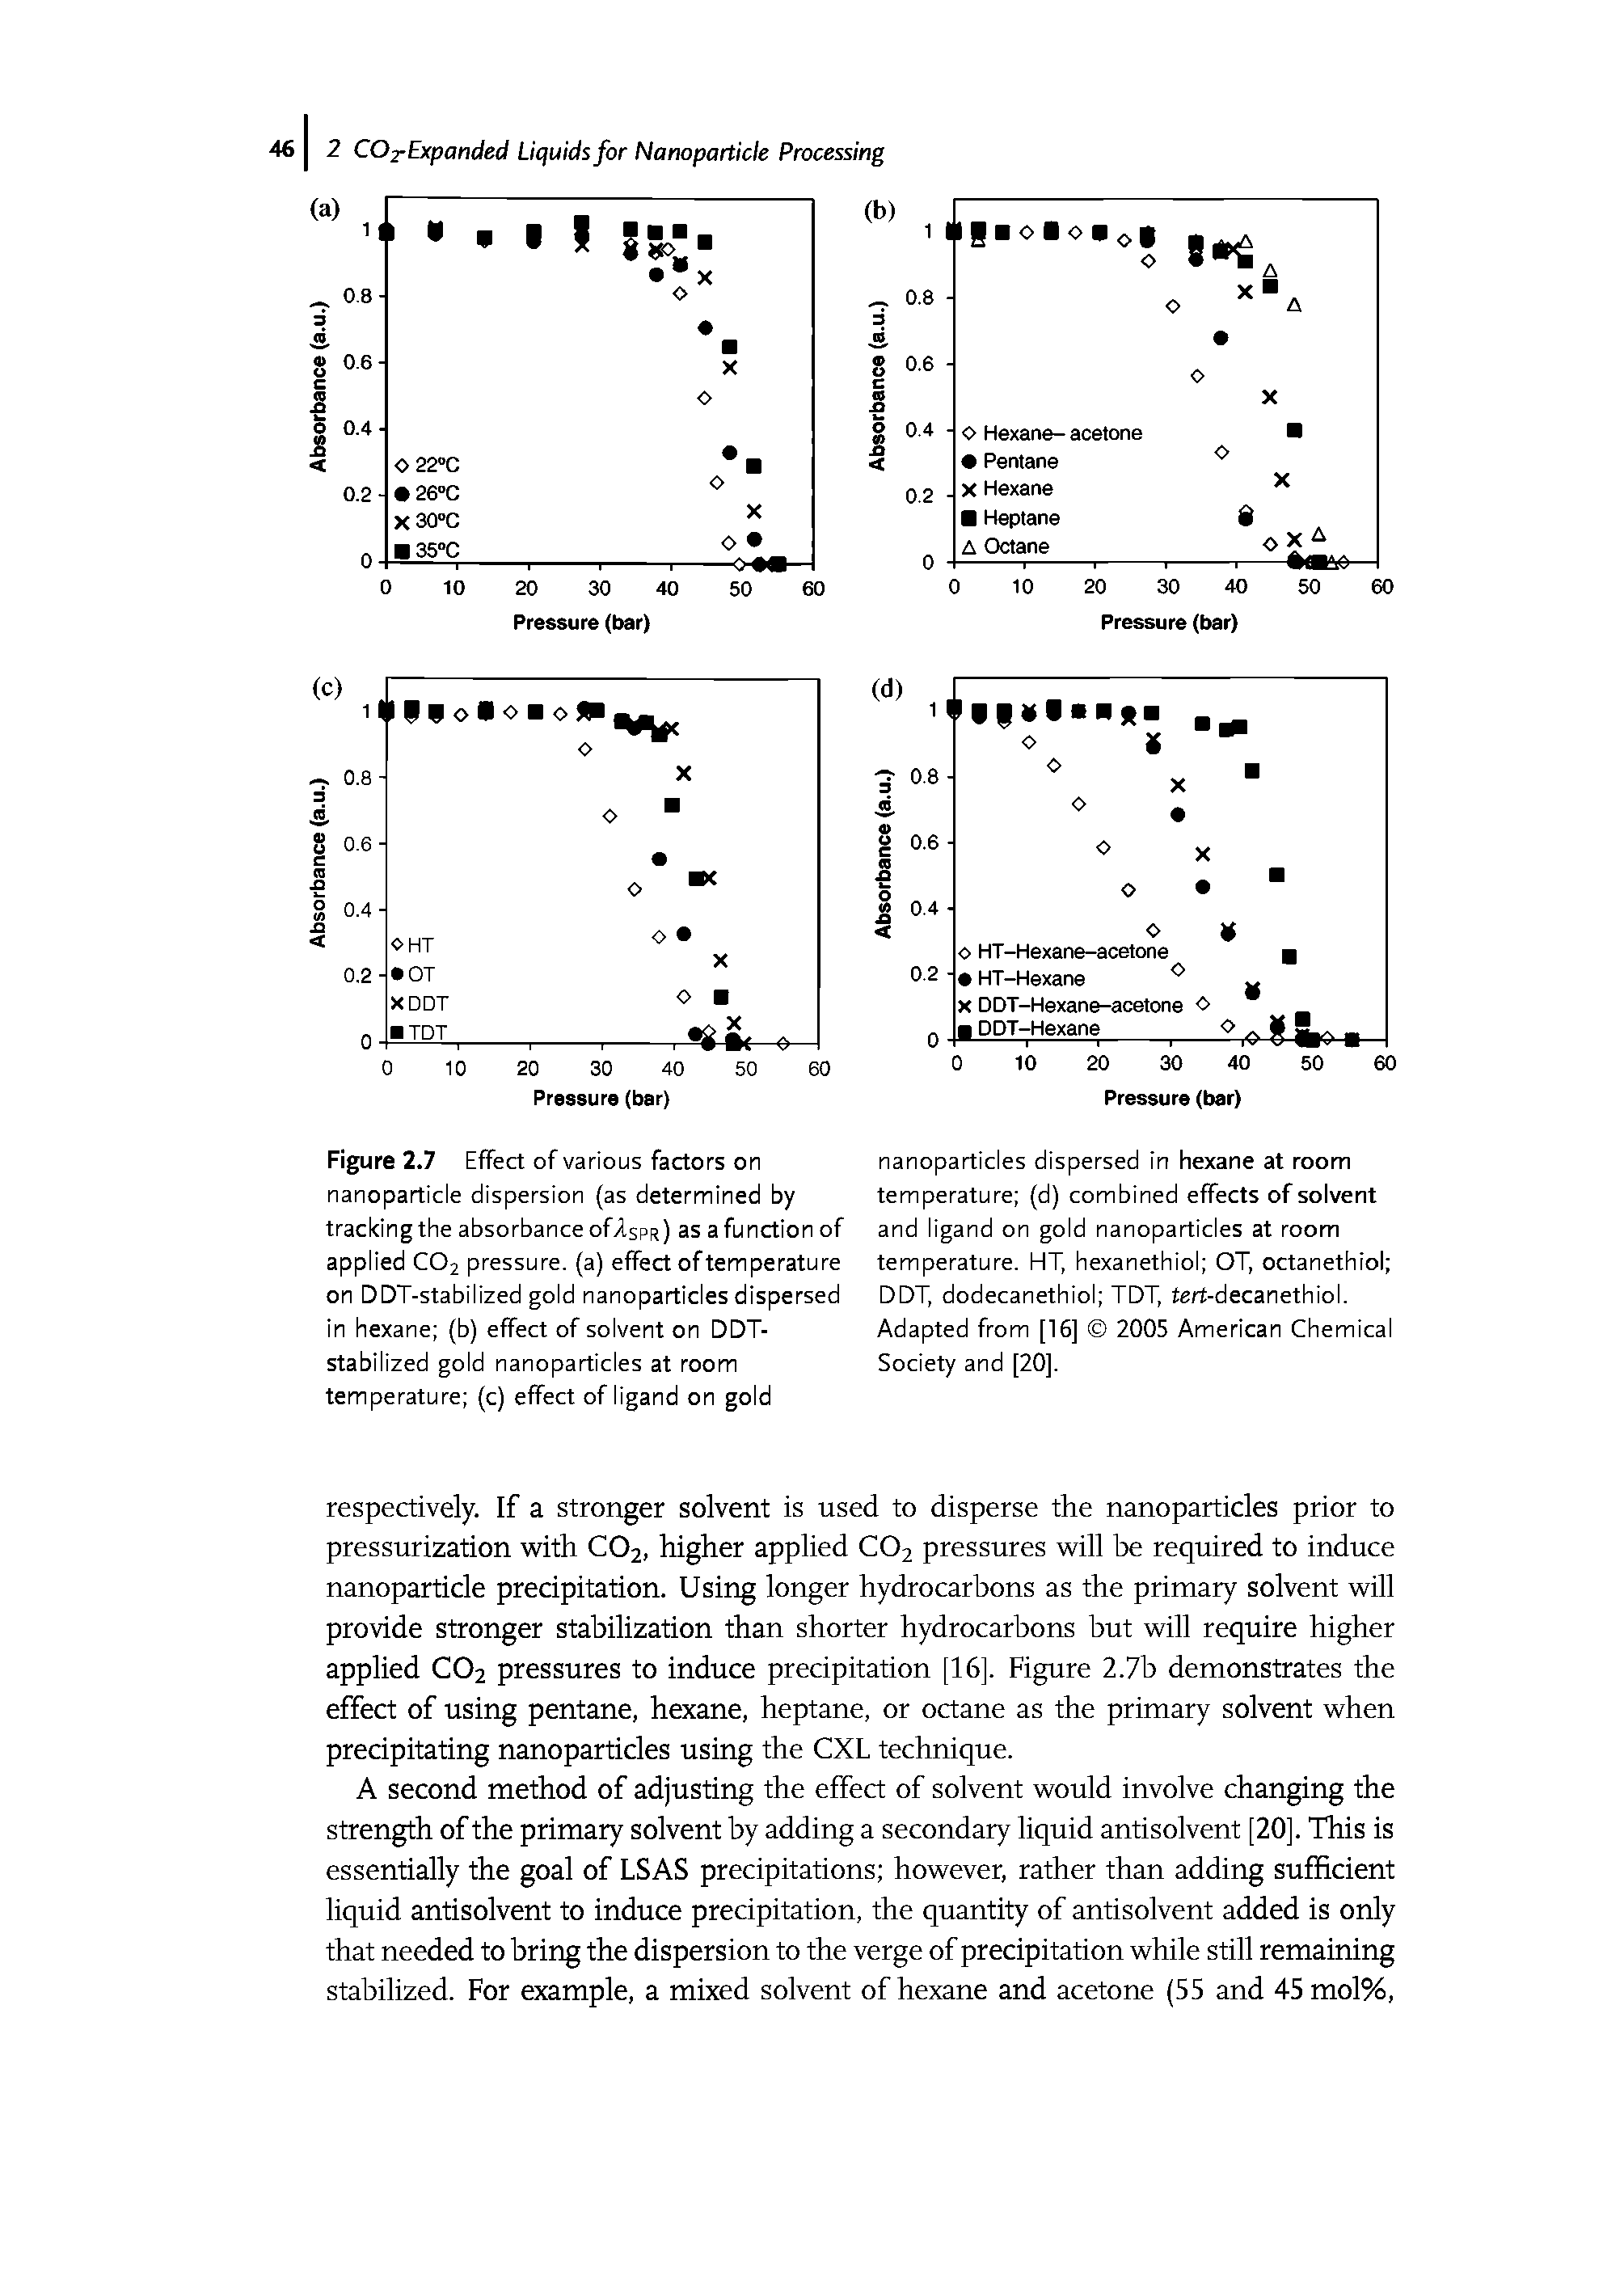 Figure 2.7 Effect of various factors on nanoparticle dispersion (as determined by tracking the absorbance oTIspr) as a function of applied C02 pressure, (a) effect of temperature on DDT-stabilized gold nanoparticles dispersed in hexane (b) effect of solvent on DDT-stabilized gold nanoparticles at room temperature (c) effect of ligand on gold...